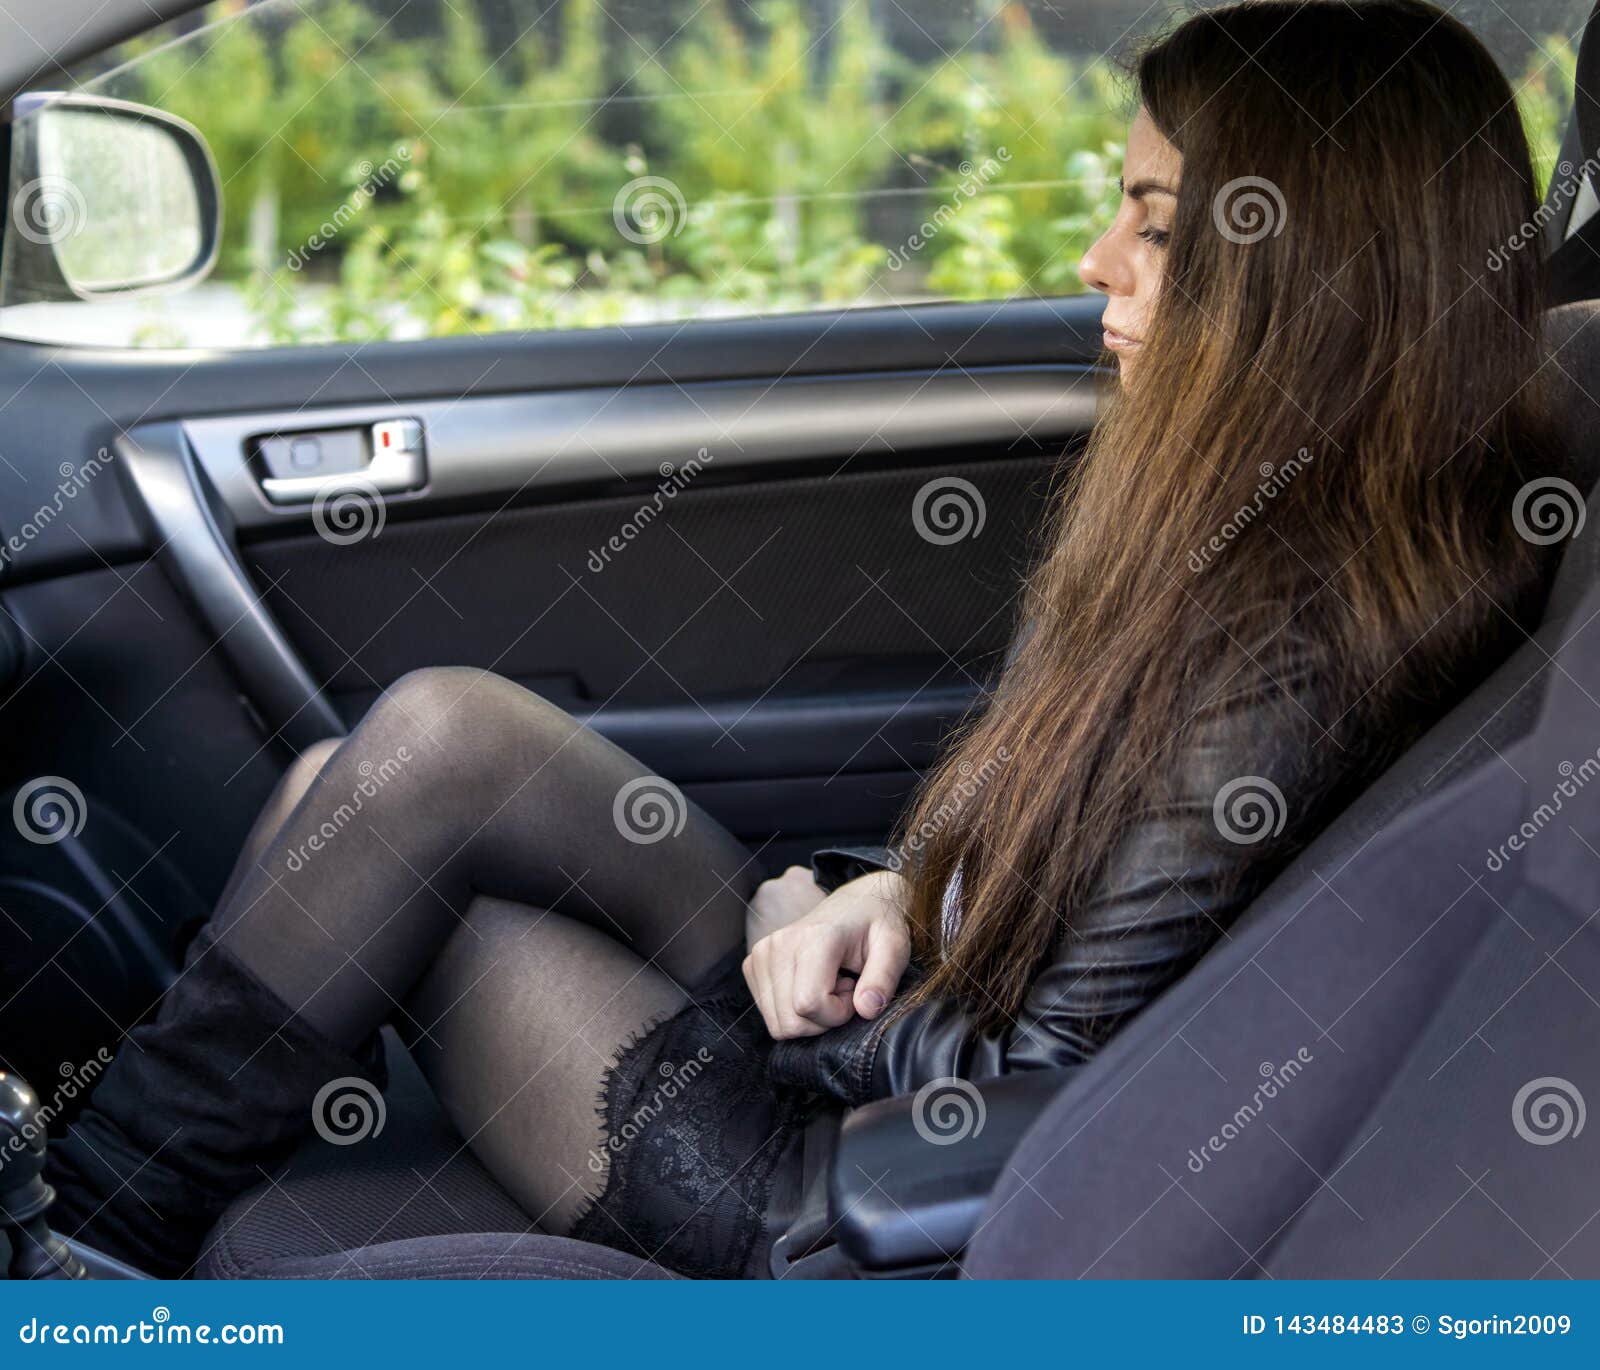 young girl with seductive legs in black pantyhose and short skirt in car